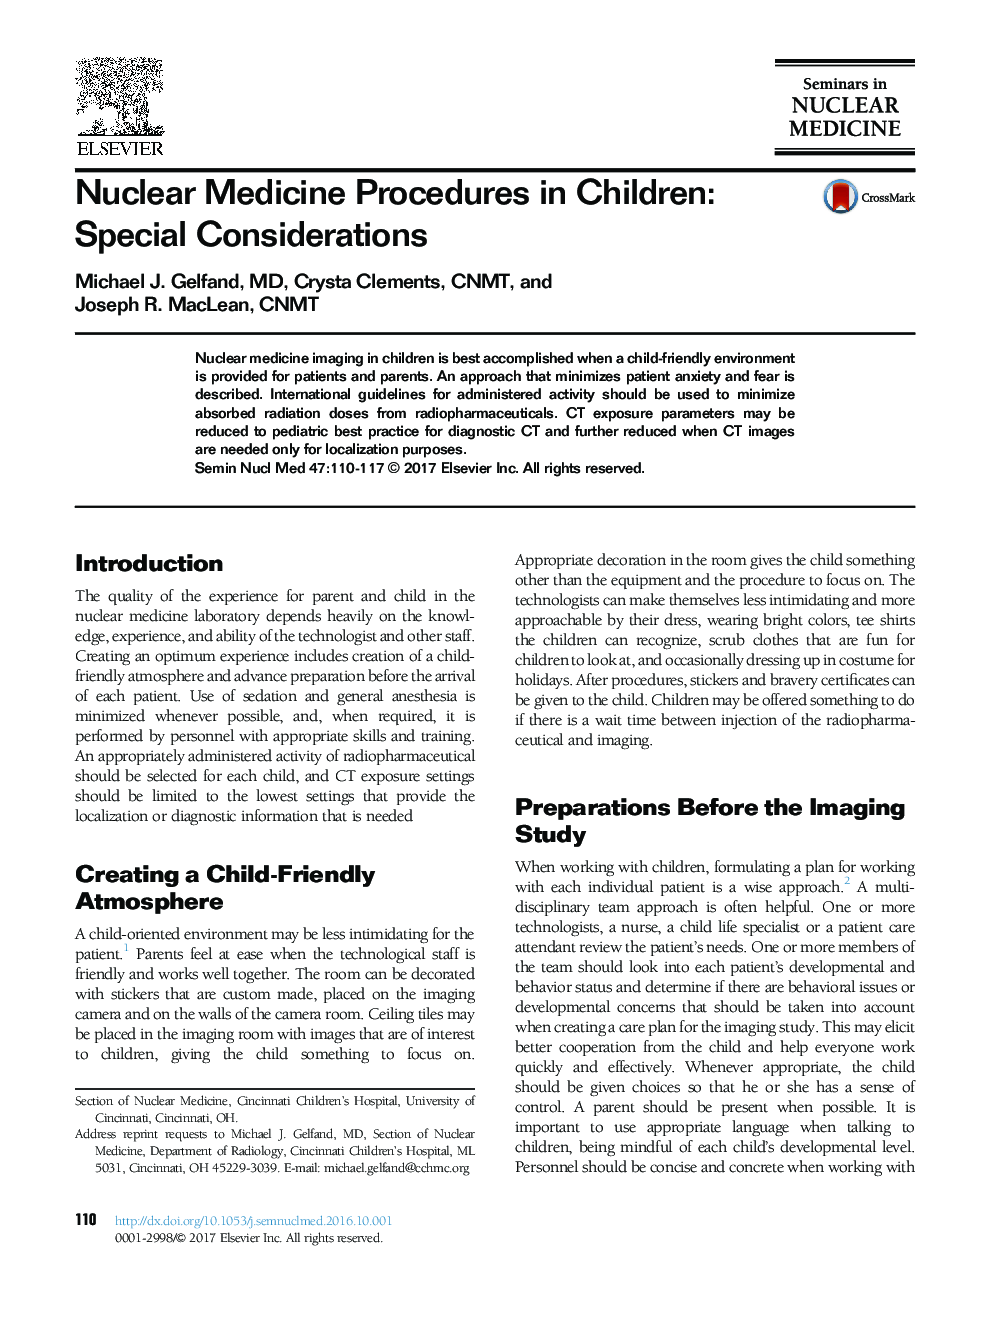 Nuclear Medicine Procedures in Children: Special Considerations